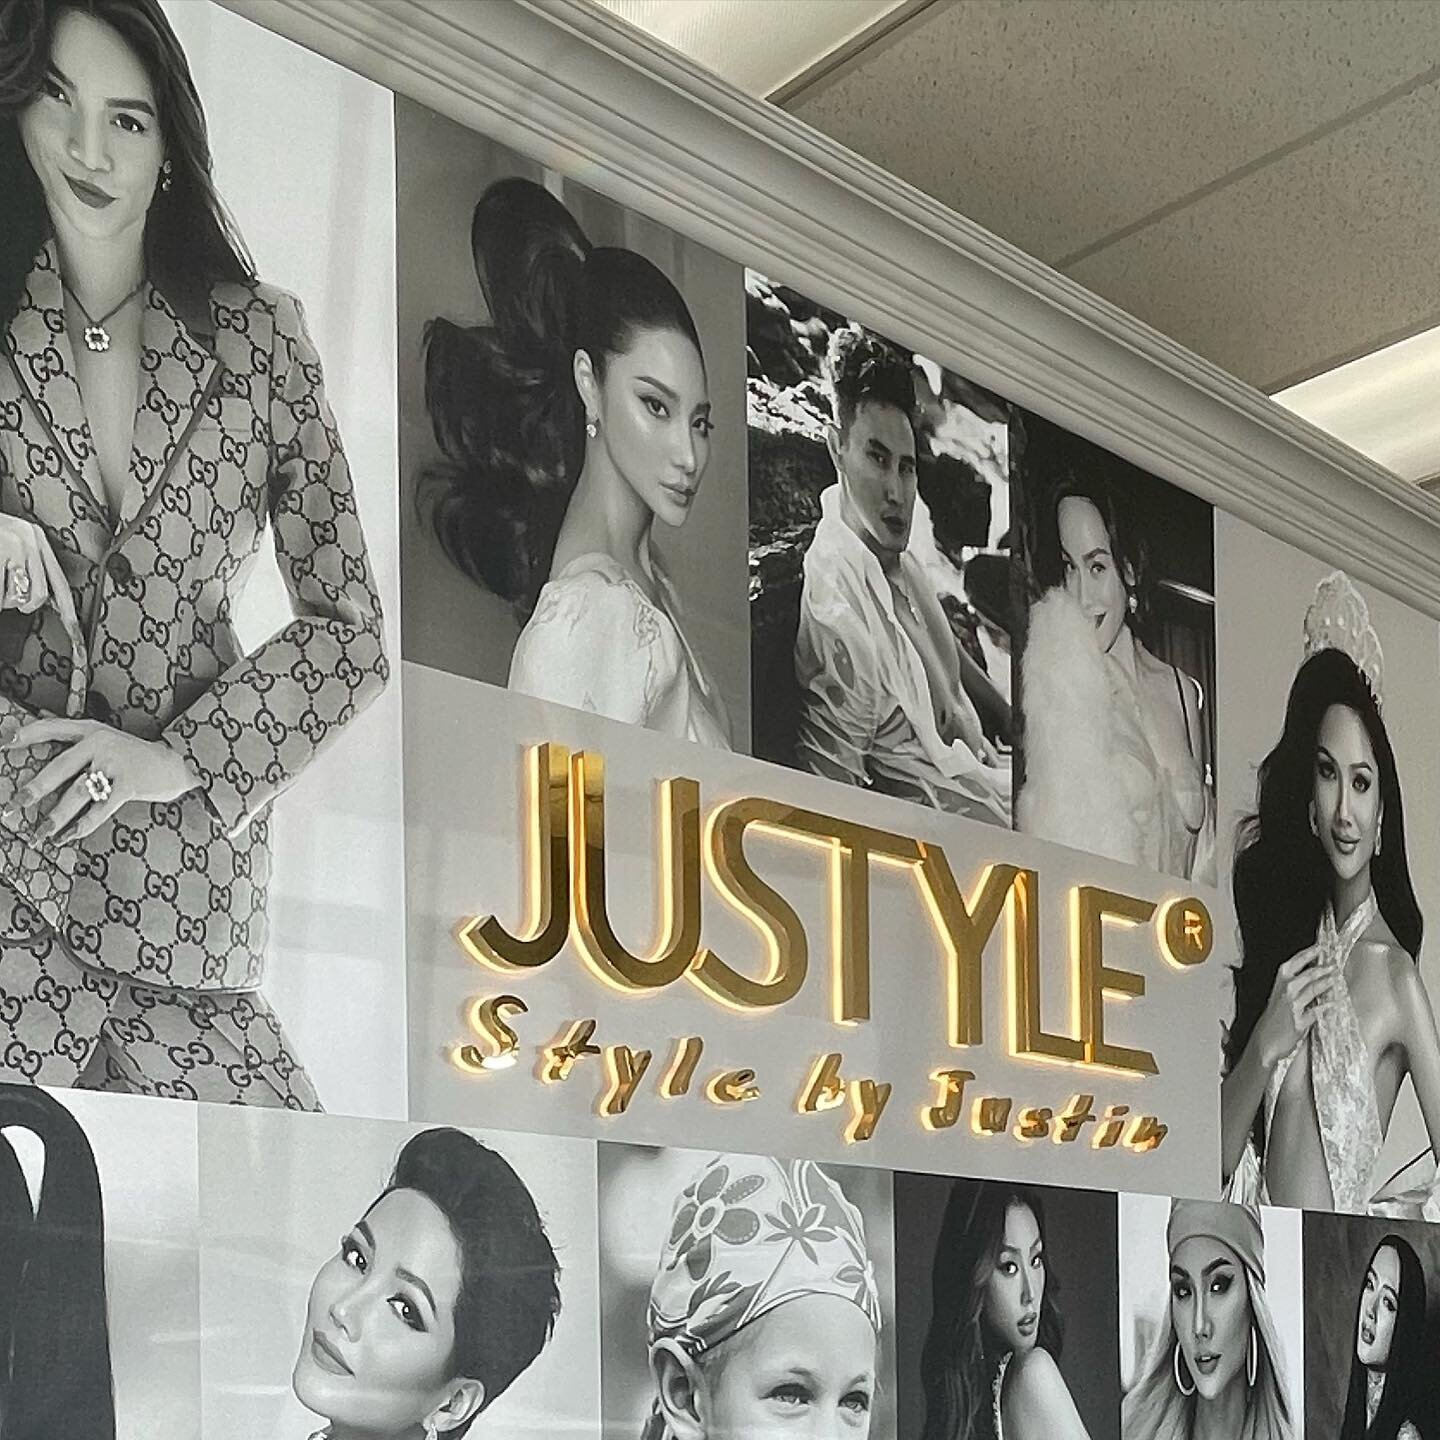 Gold plated sign for Juststyle ##orangecountycalifornia